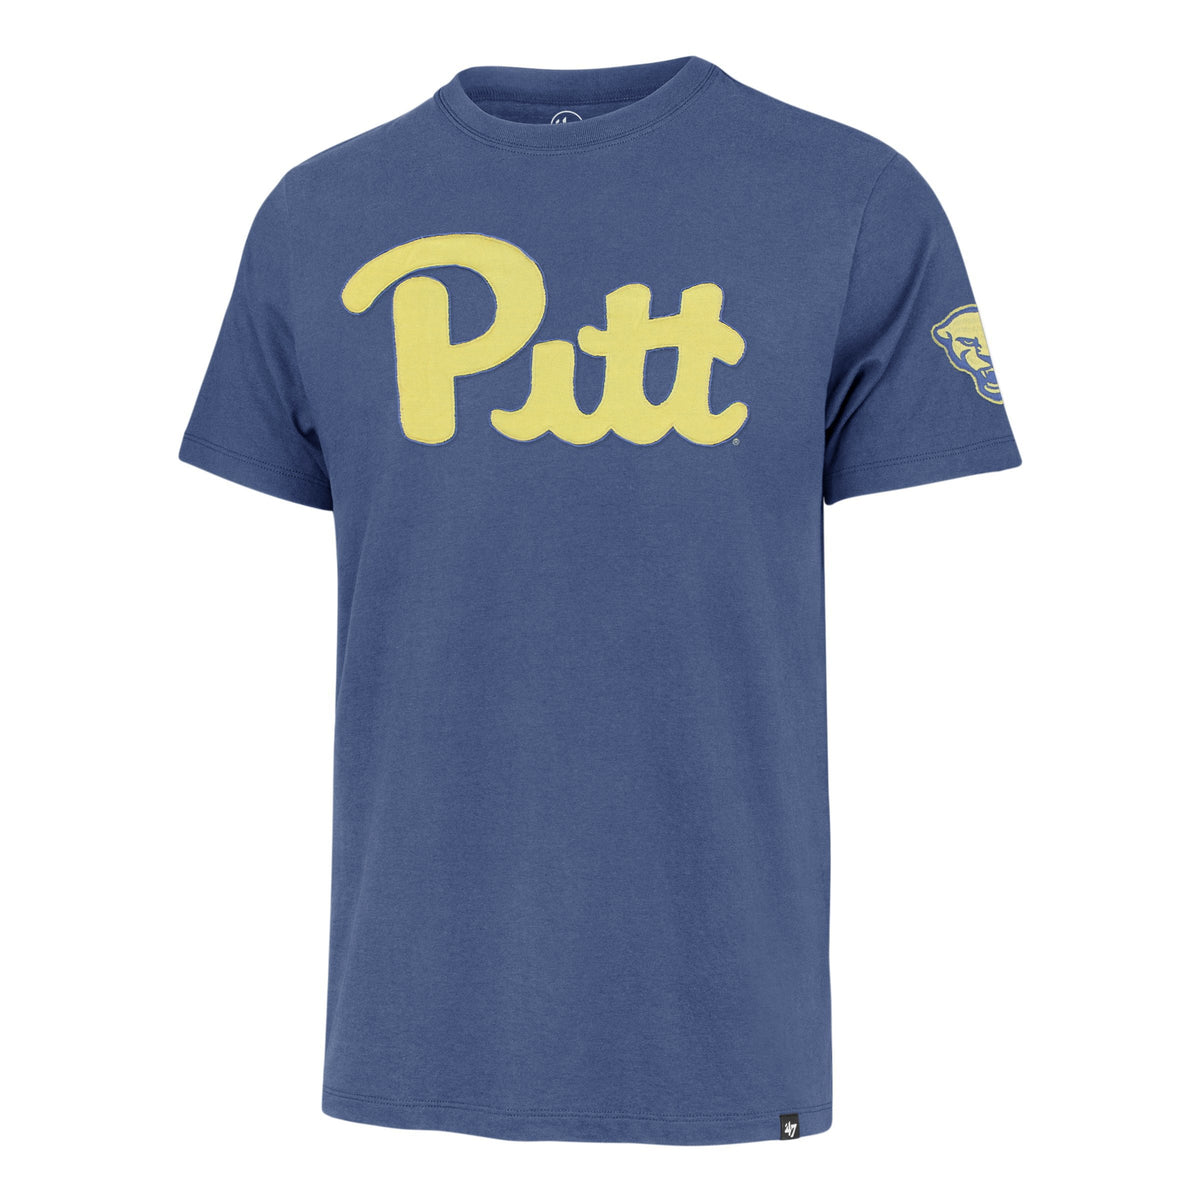 PITTSBURGH PANTHERS '47 FRANKLIN FIELDHOUSE TEE